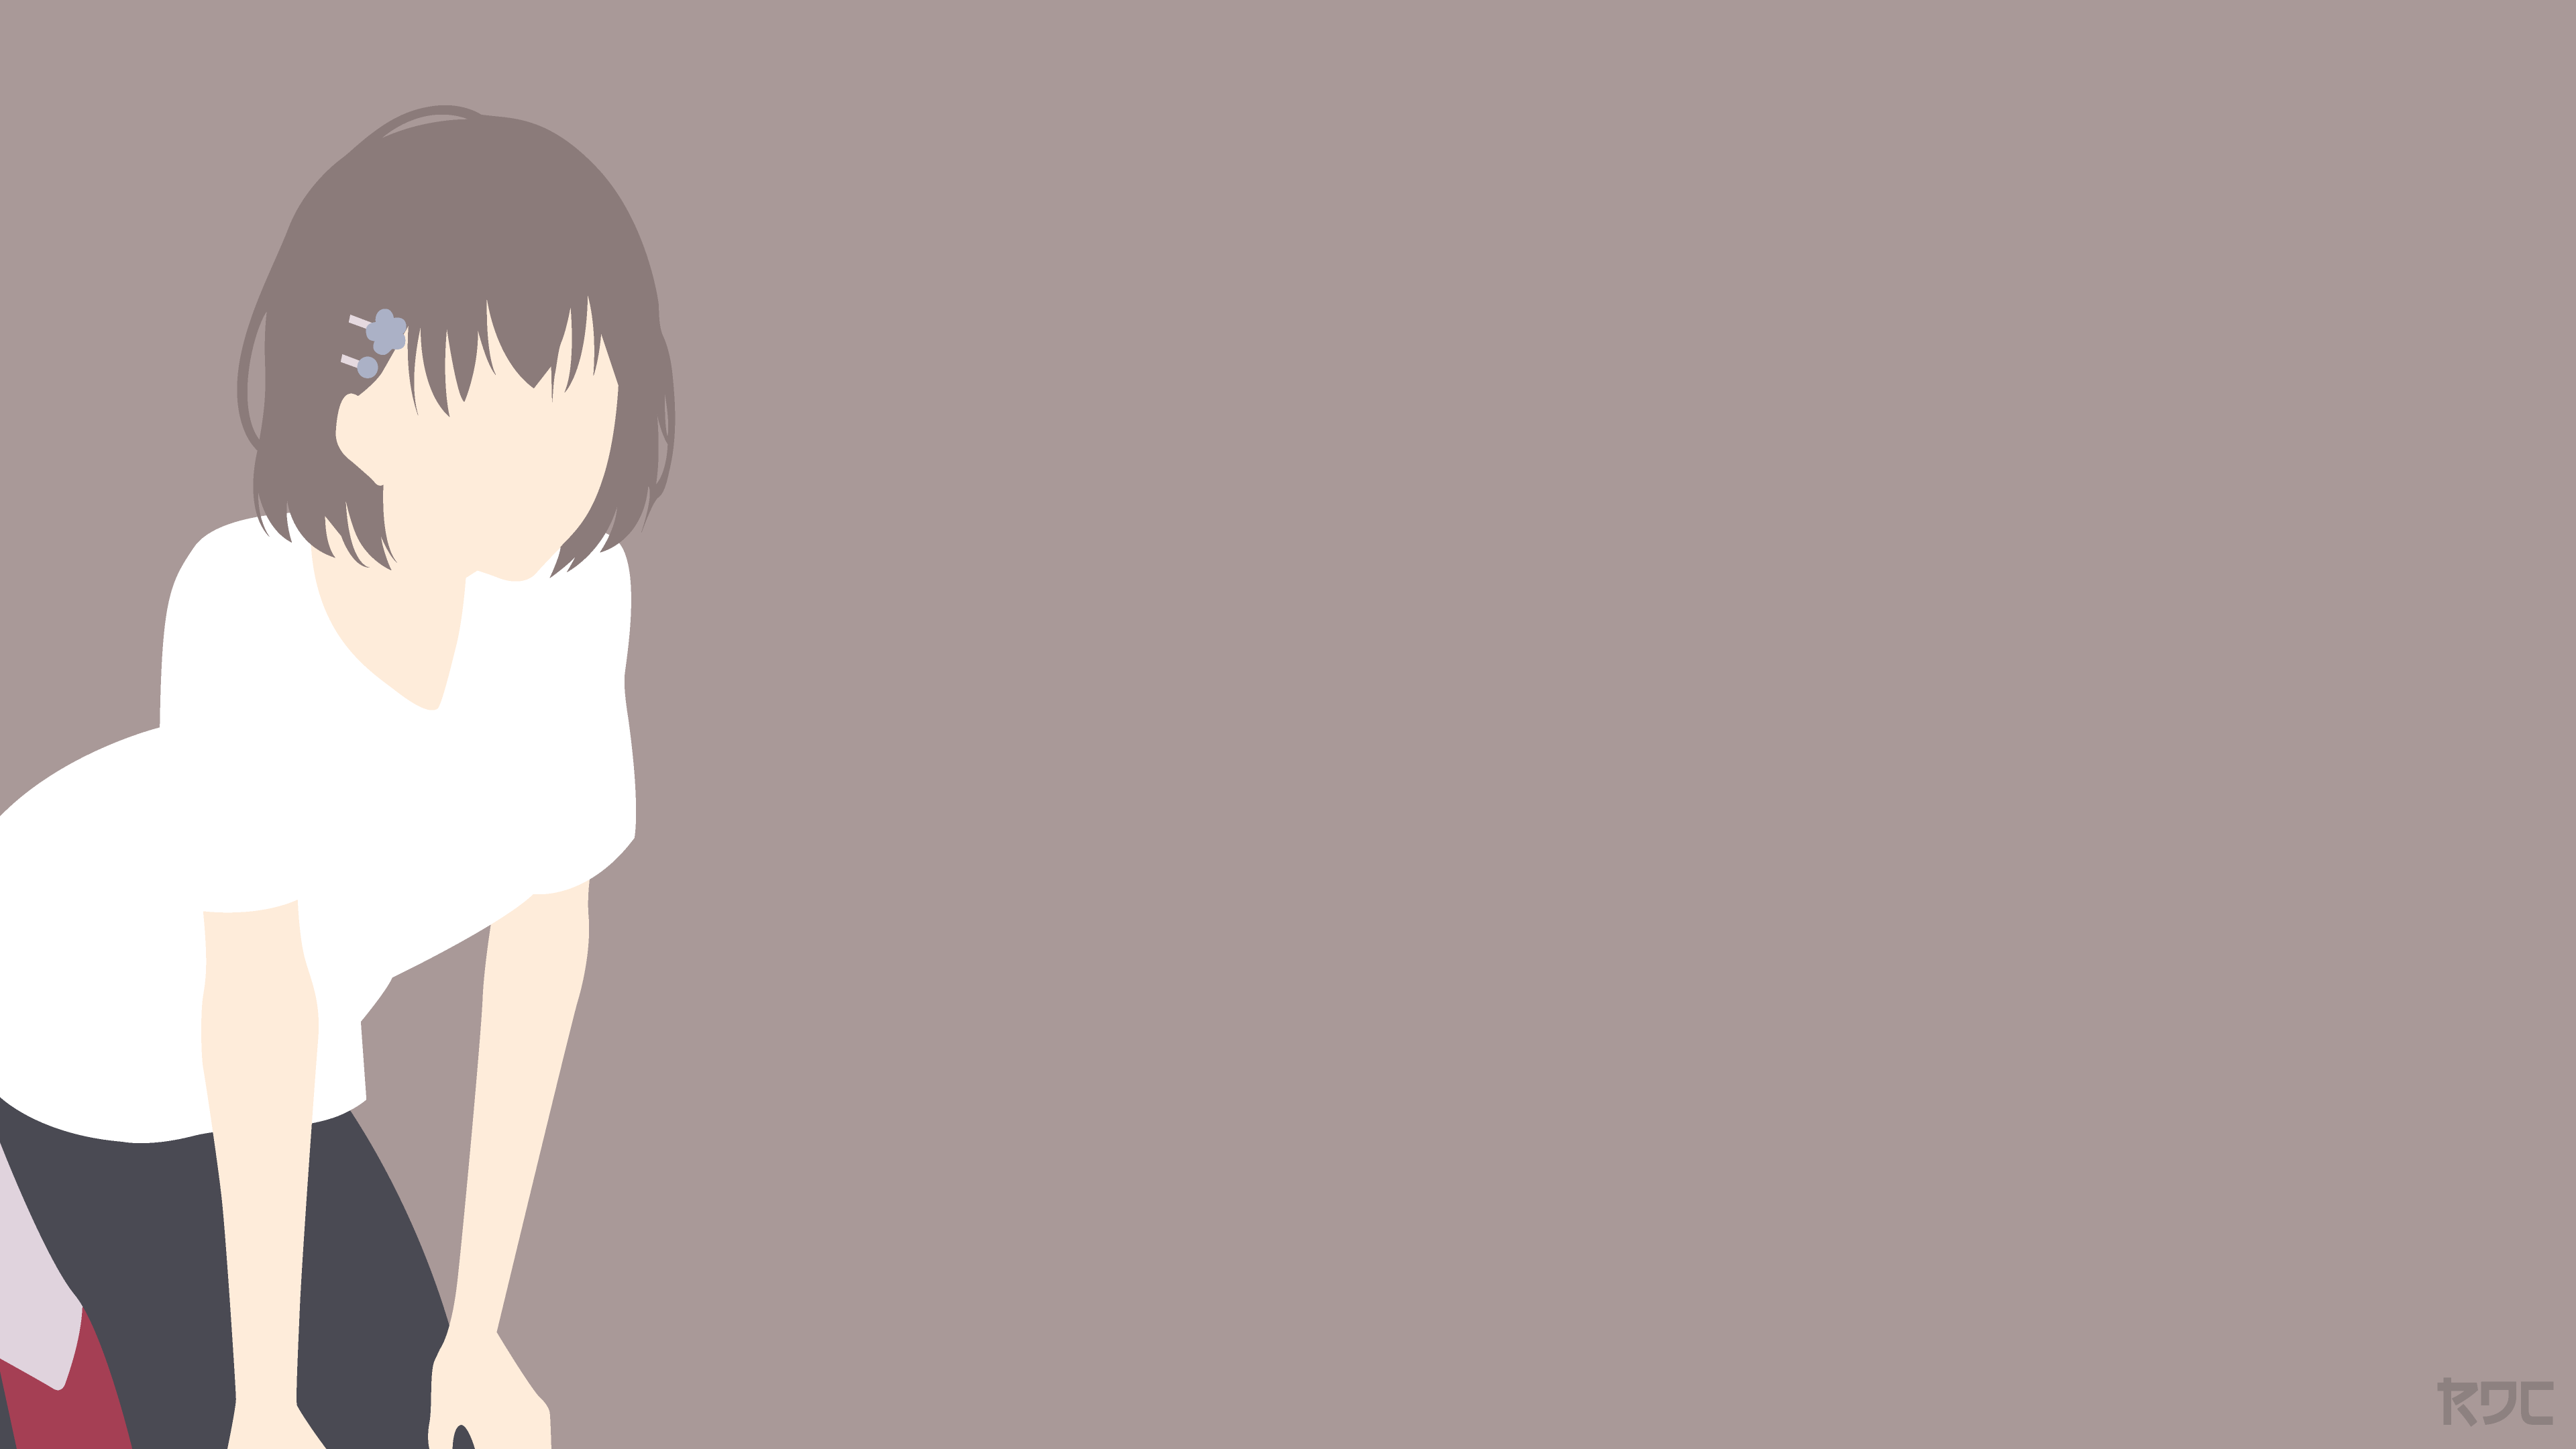 Anime ReLIFE HD Wallpaper | Background Image